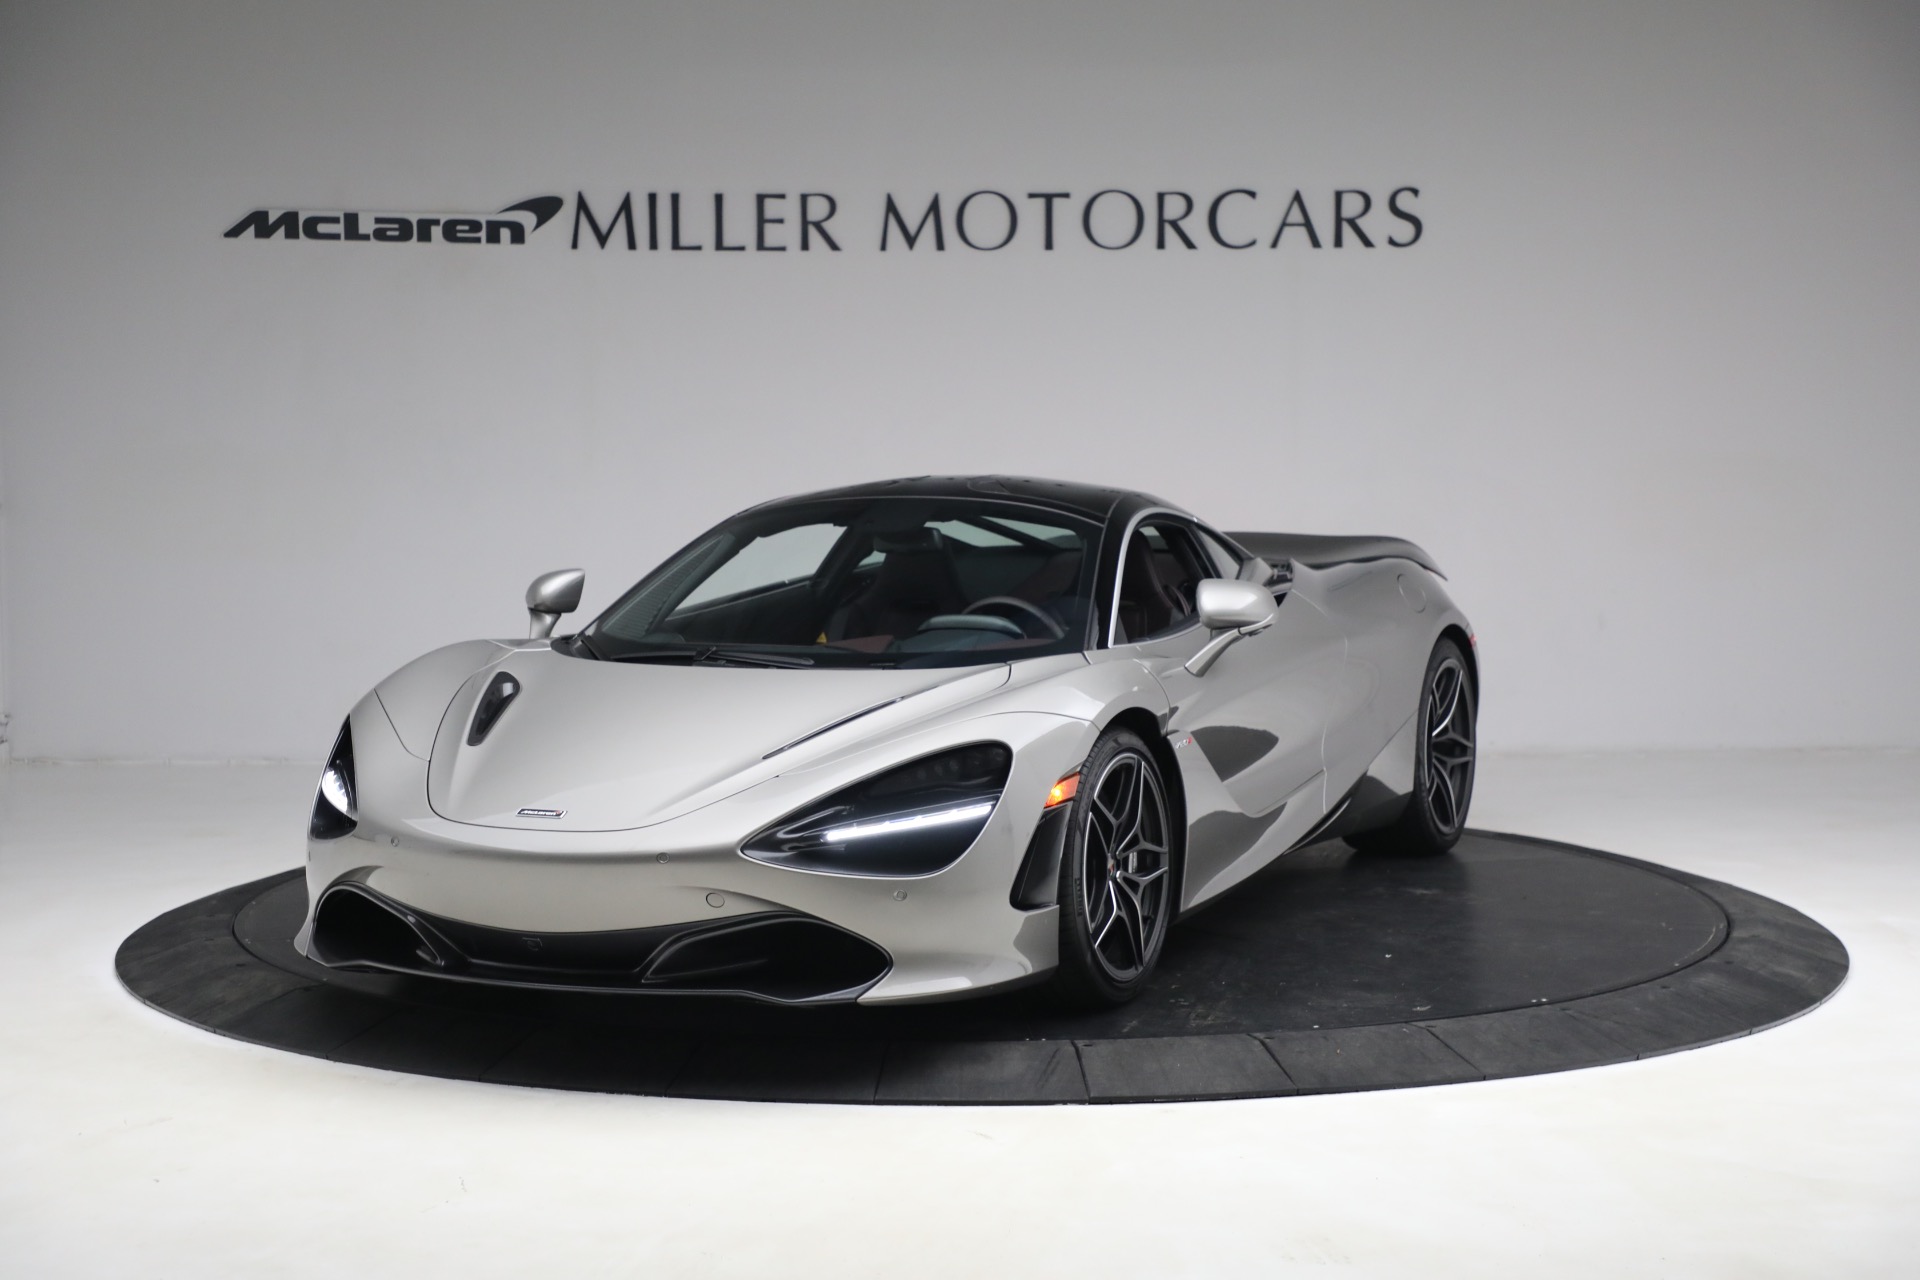 Used 2018 McLaren 720S Luxury for sale $273,900 at Aston Martin of Greenwich in Greenwich CT 06830 1